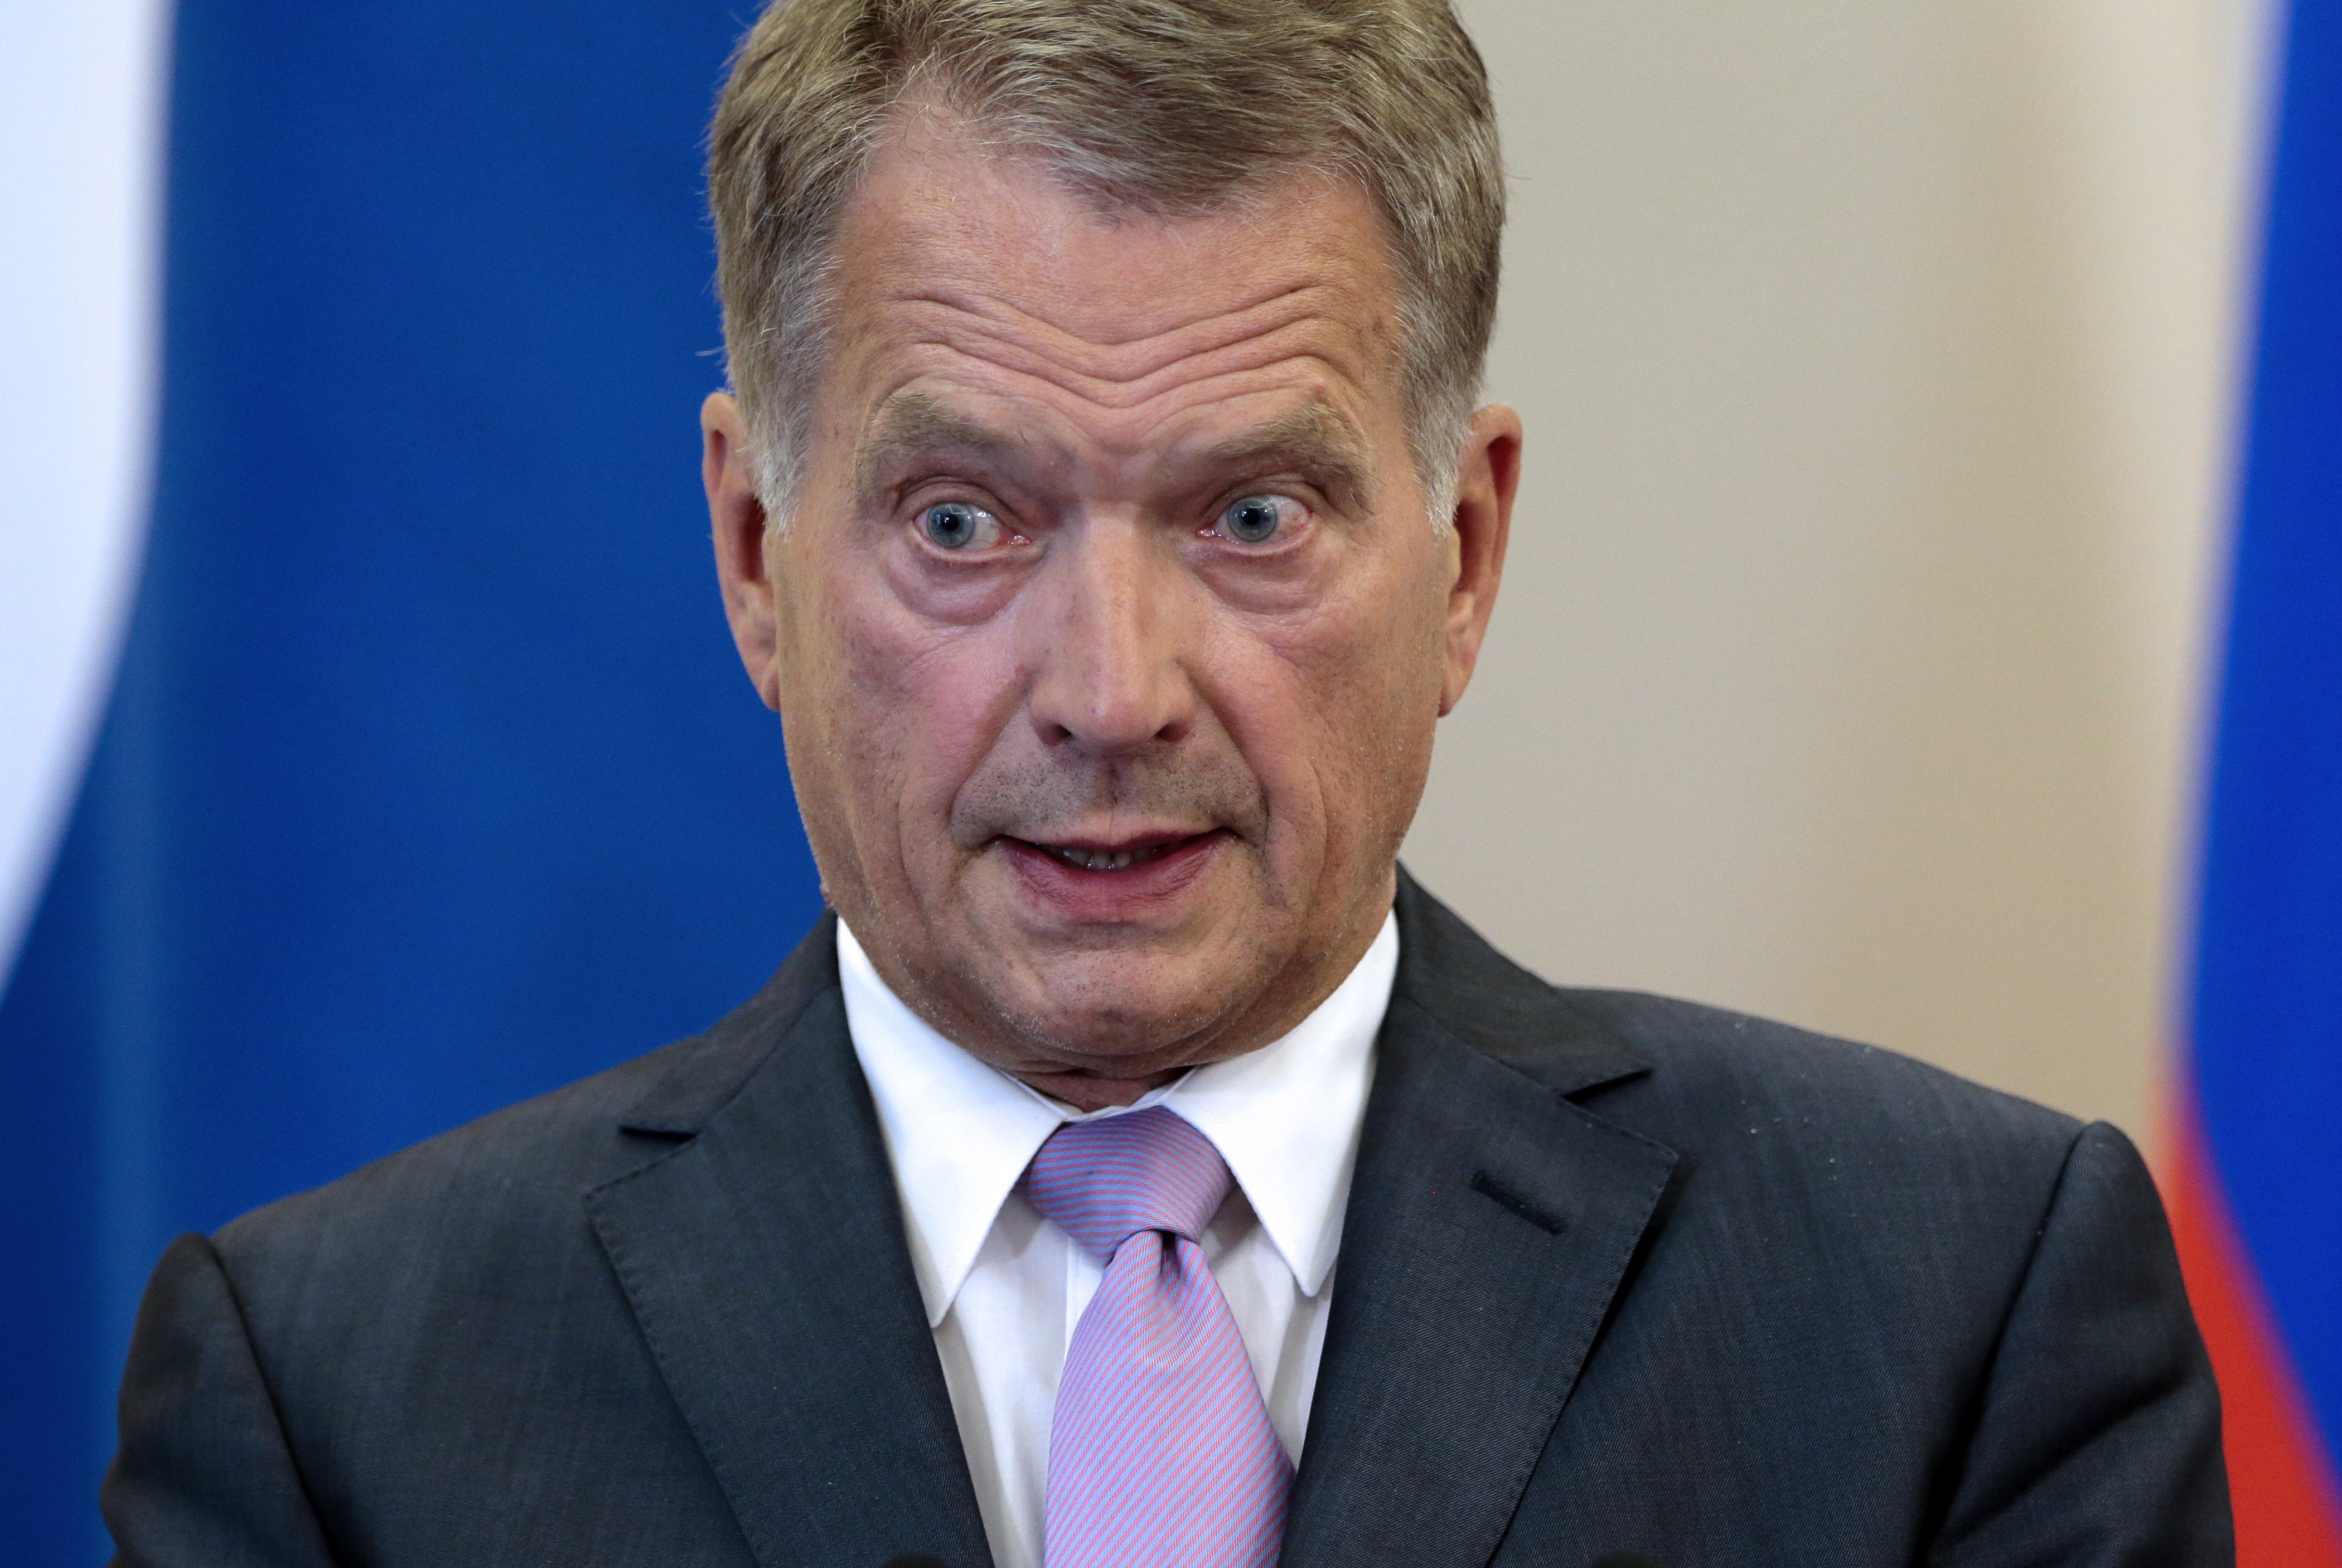 Finnish President Sauli Niinistö at a press conference in Russia in August 2014. (Ivan Sekretarev /AFP/Getty Images)